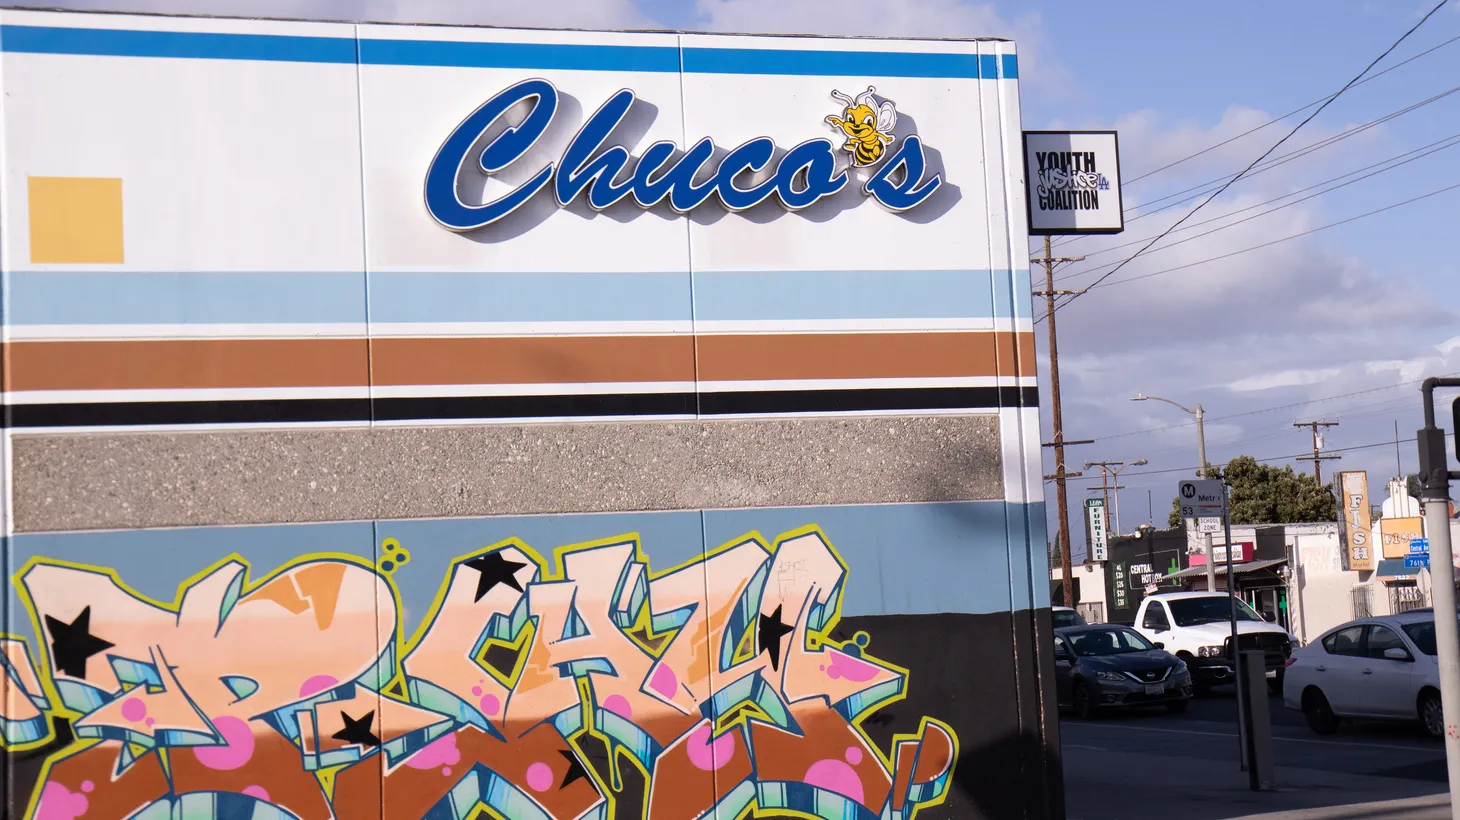 Chuco’s Justice Center in South Central used to be a juvenile courthouse where young people waited to be sentenced to prison. Now it’s a community center, alternative high school, and headquarters for the Youth Justice Coalition.